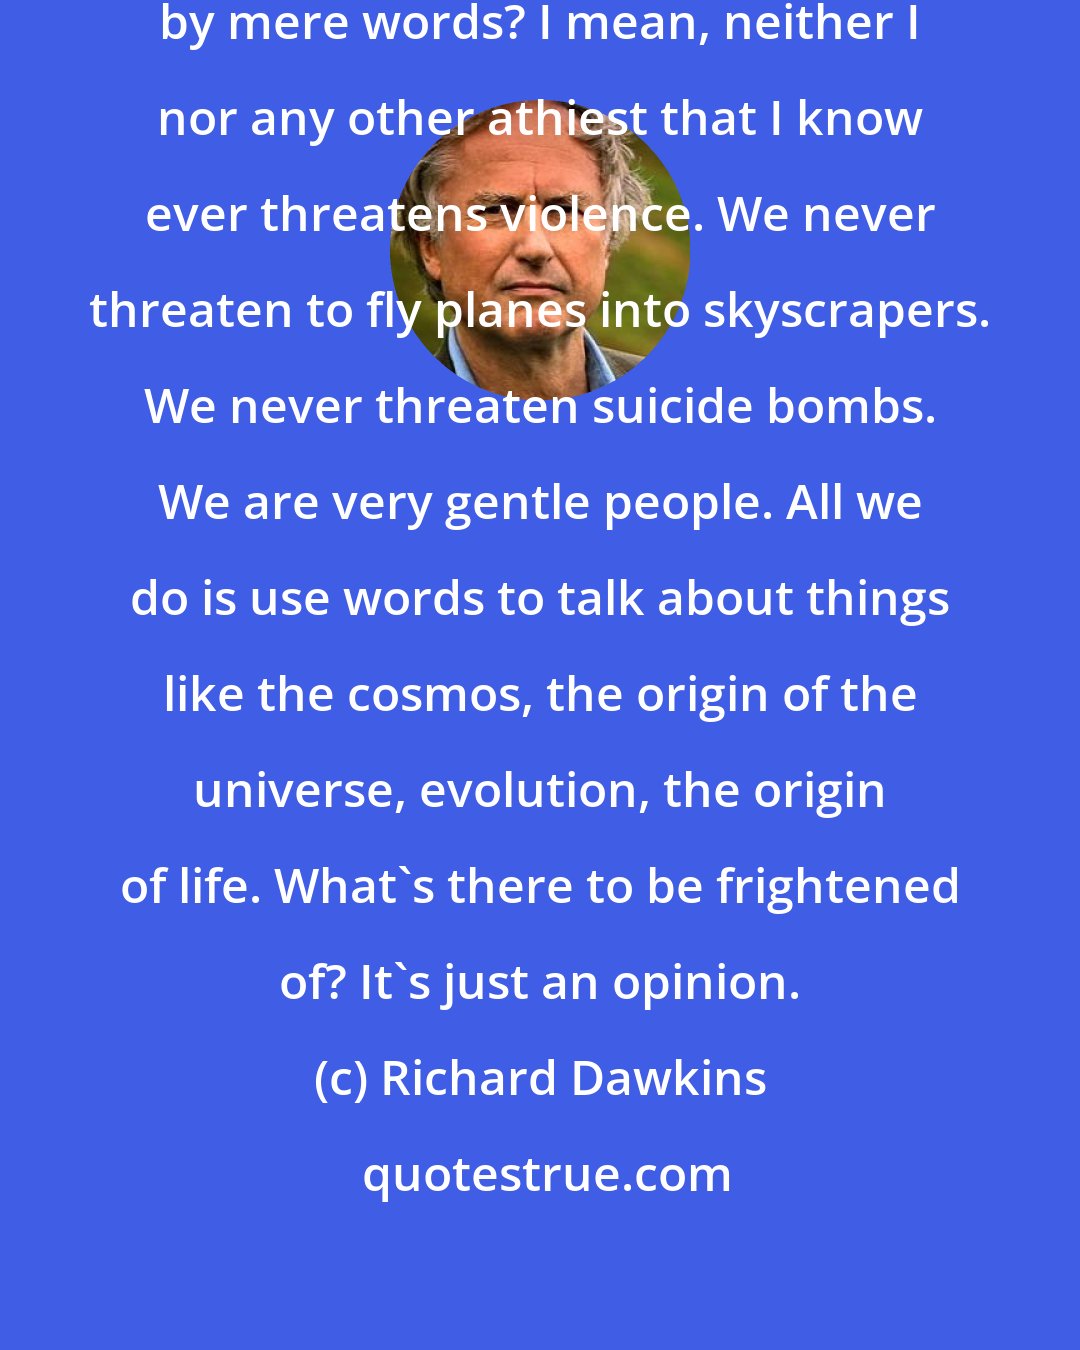 Richard Dawkins: Why would anybody be intimidated by mere words? I mean, neither I nor any other athiest that I know ever threatens violence. We never threaten to fly planes into skyscrapers. We never threaten suicide bombs. We are very gentle people. All we do is use words to talk about things like the cosmos, the origin of the universe, evolution, the origin of life. What's there to be frightened of? It's just an opinion.